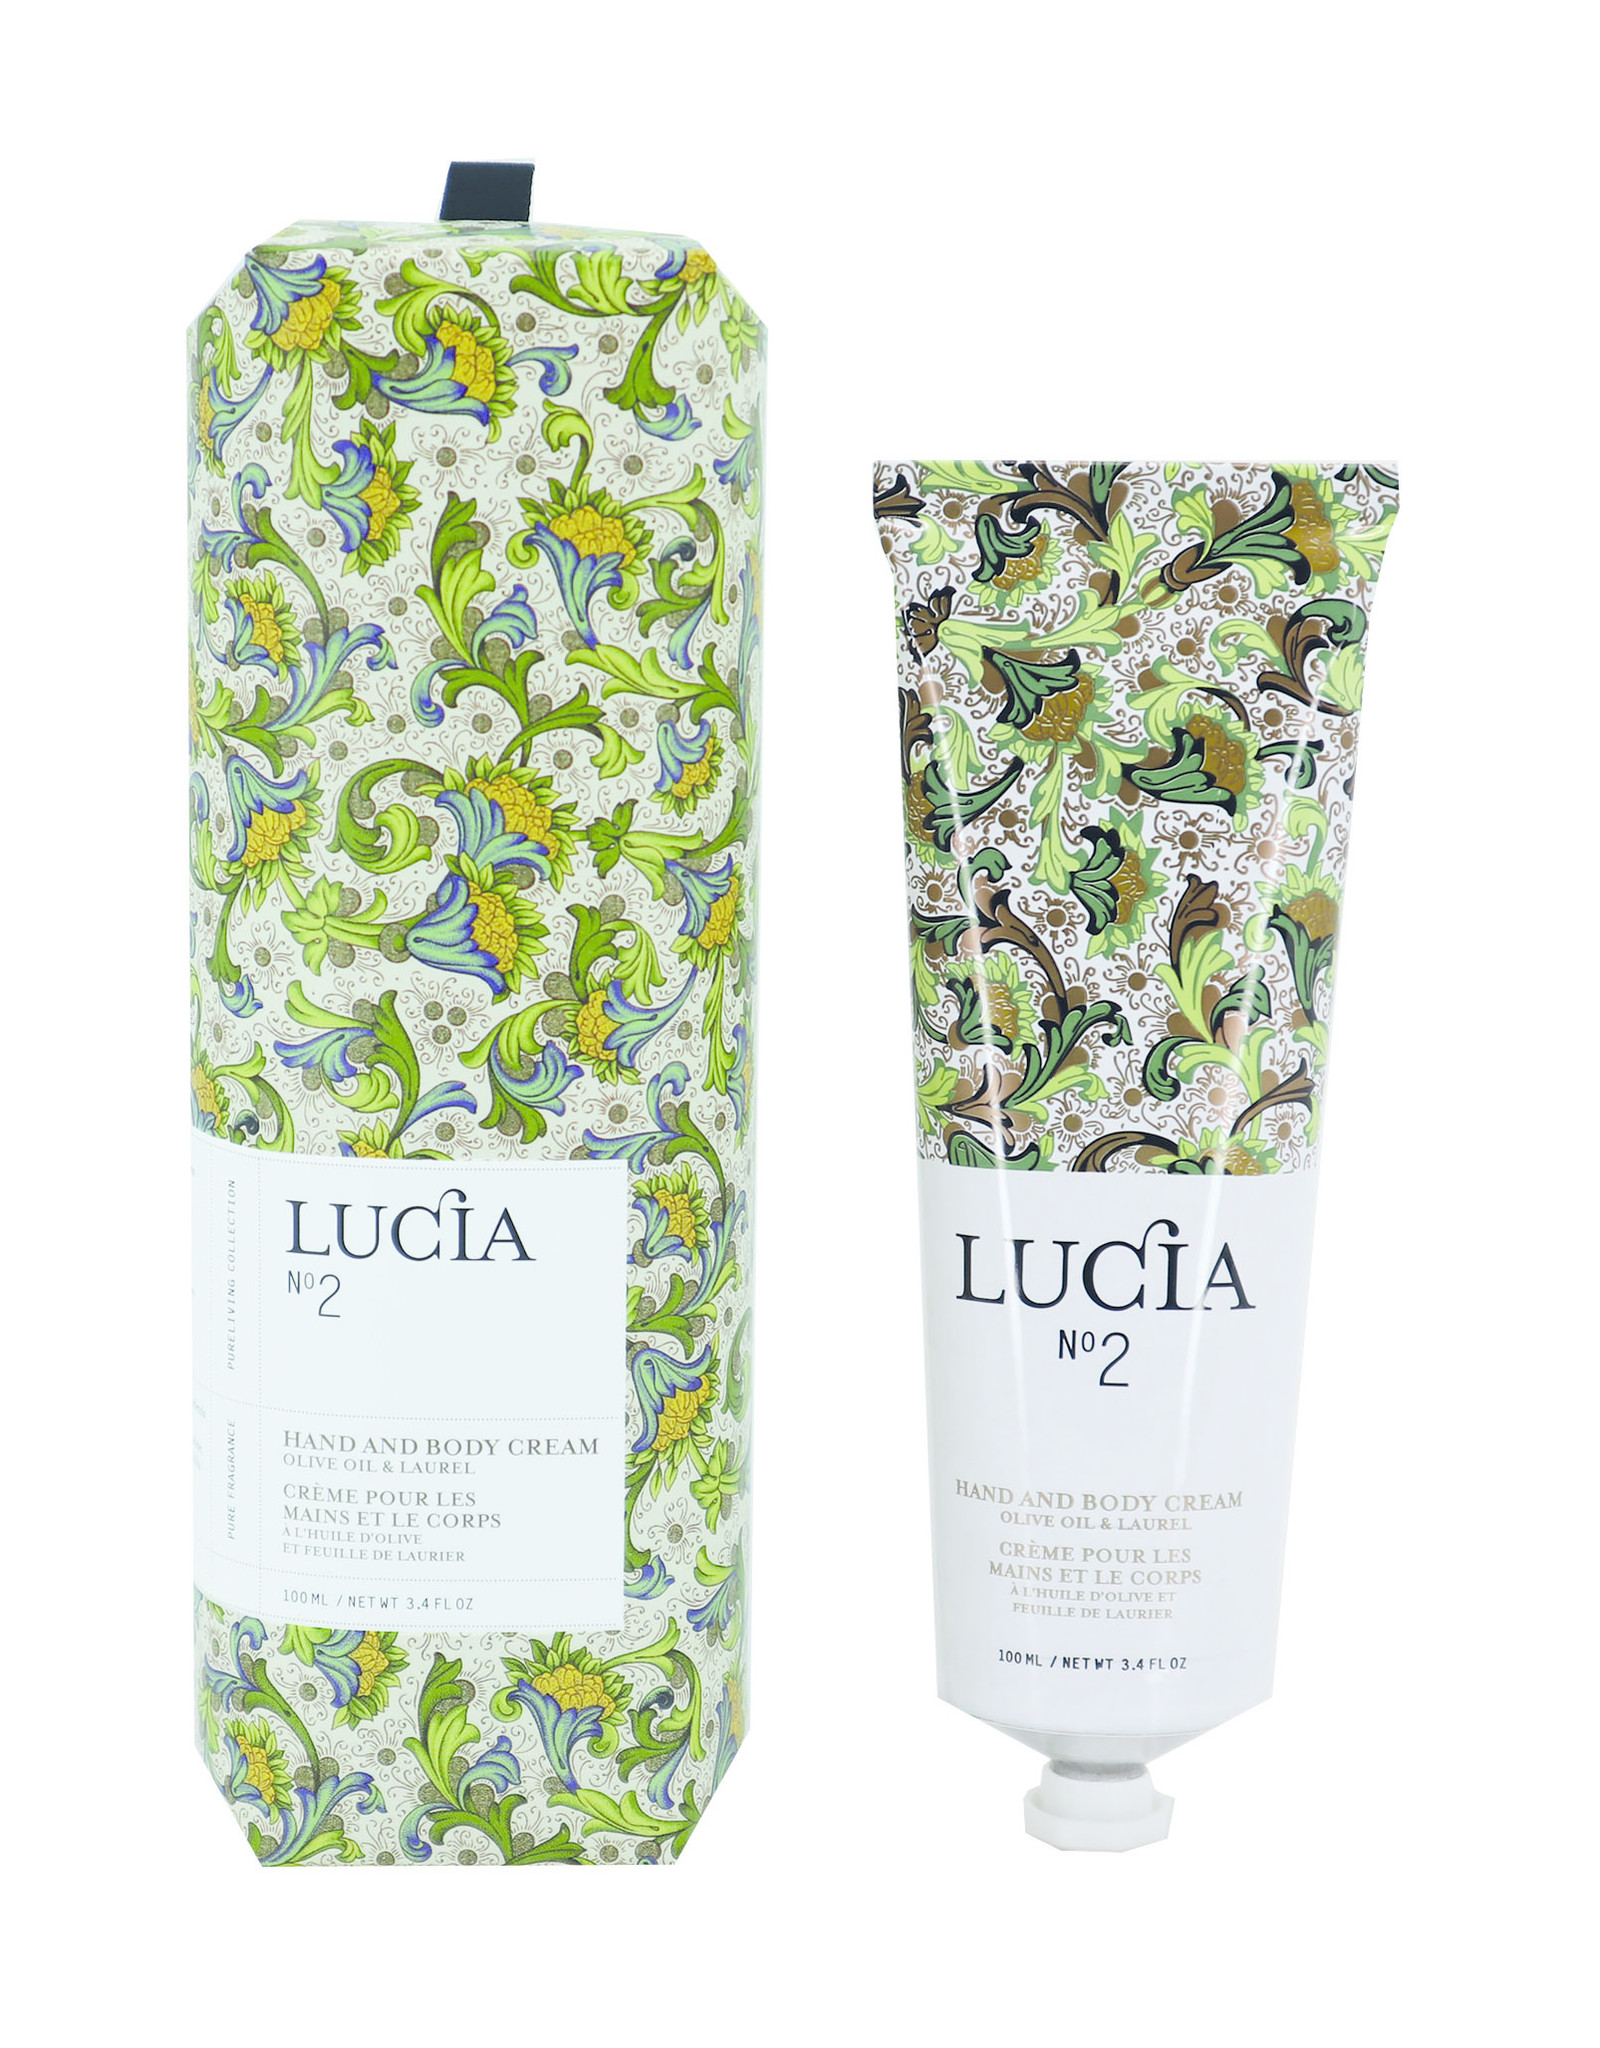 Olive Oil & Laurel Leaf Hand and Body Cream